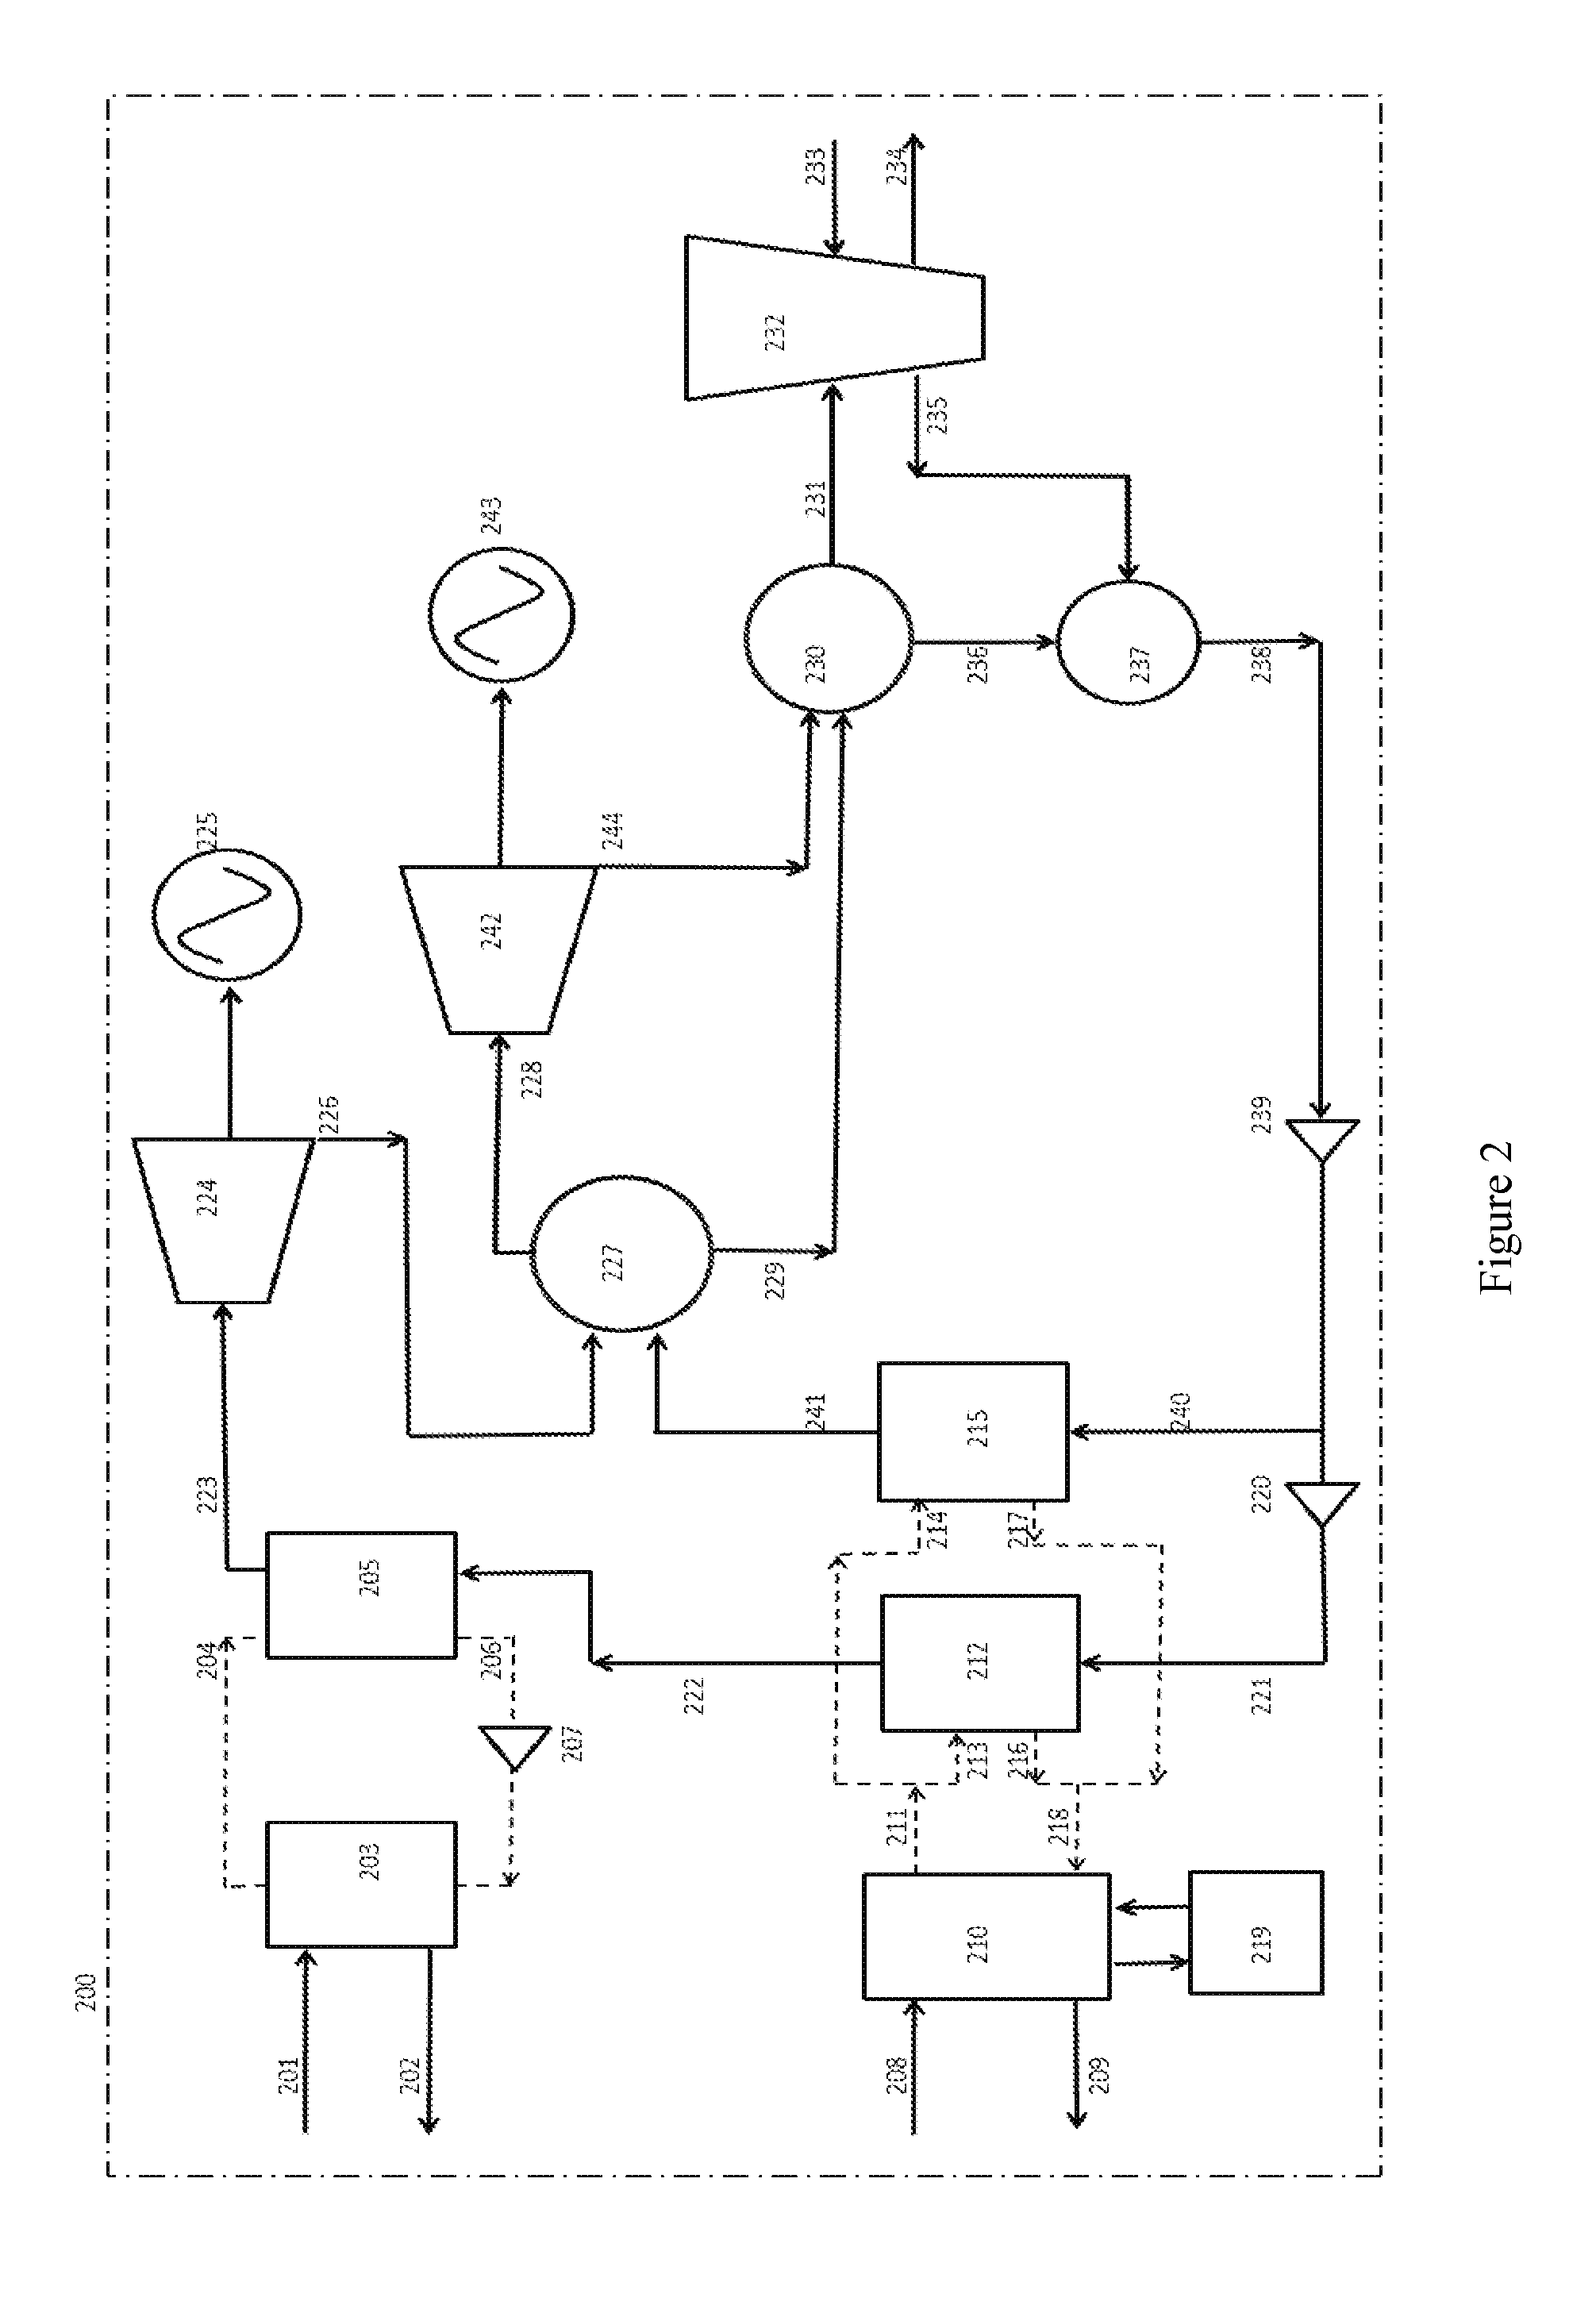 Multiple organic rankine cycle system and method